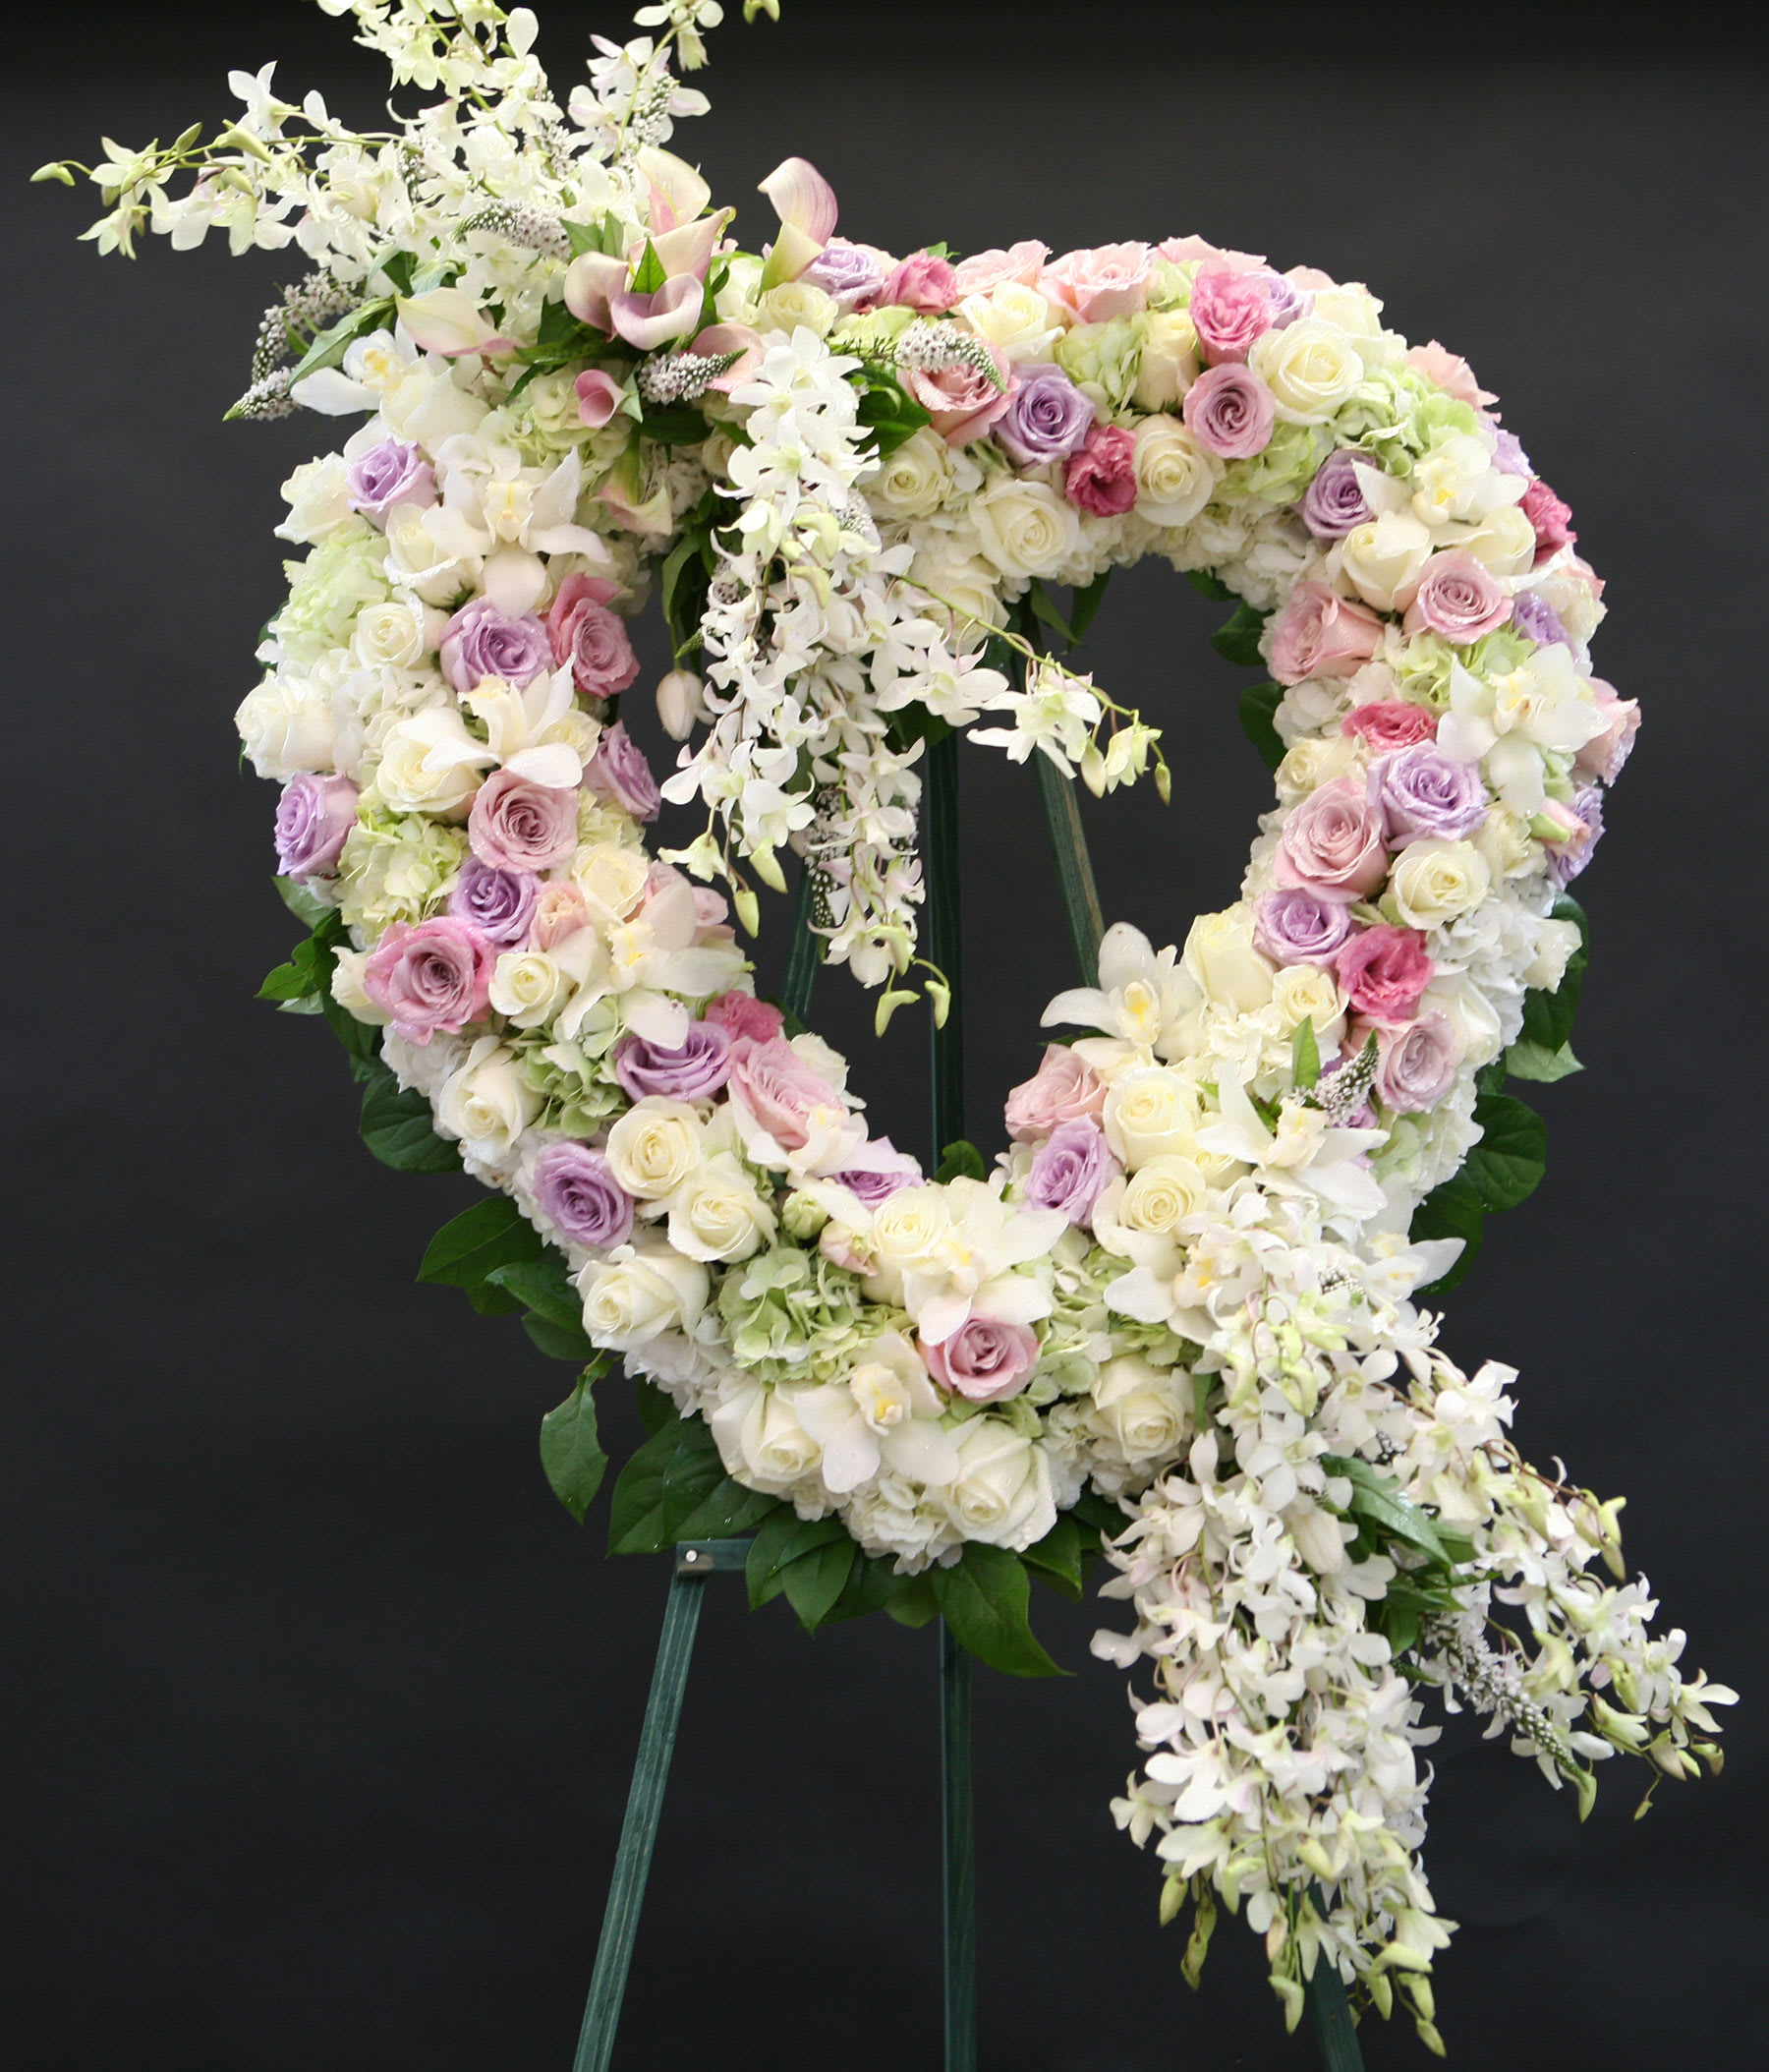 Spirited Heart Wreath with Roses, Lilies & Orchids by Jacob Maarse